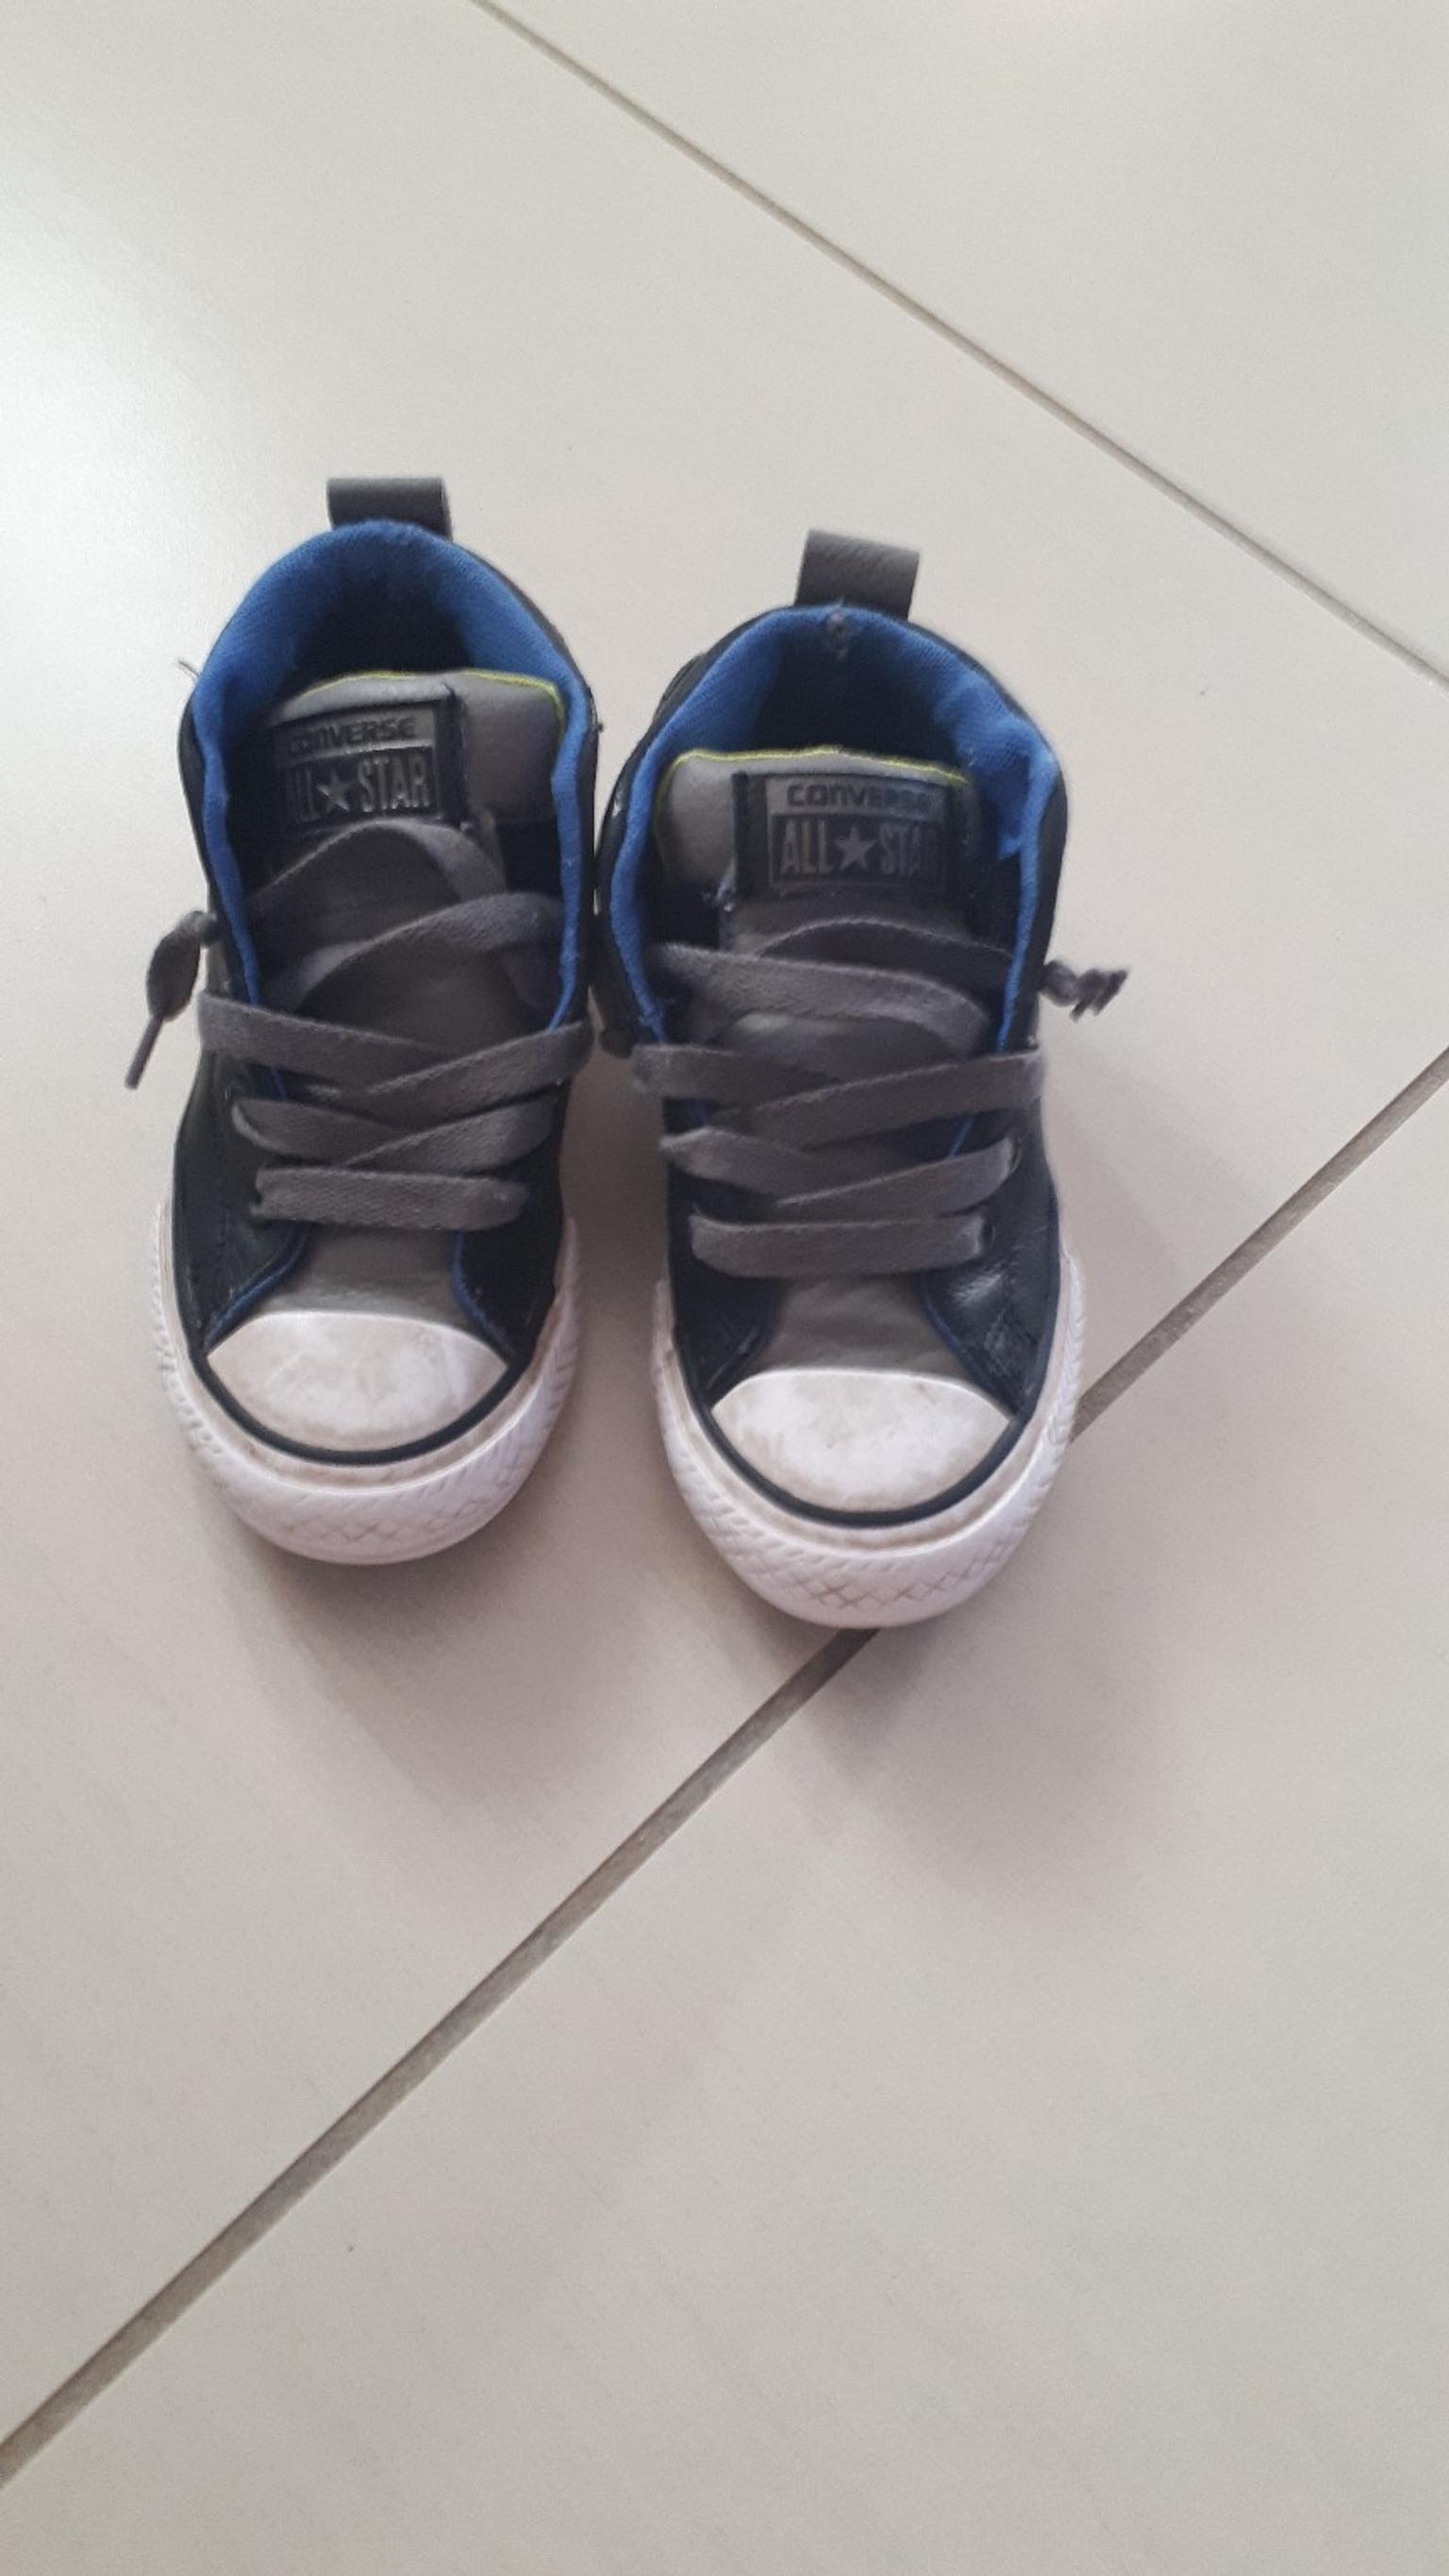 Converse bambino in 00040 Ardea for €25.00 for sale | Shpock